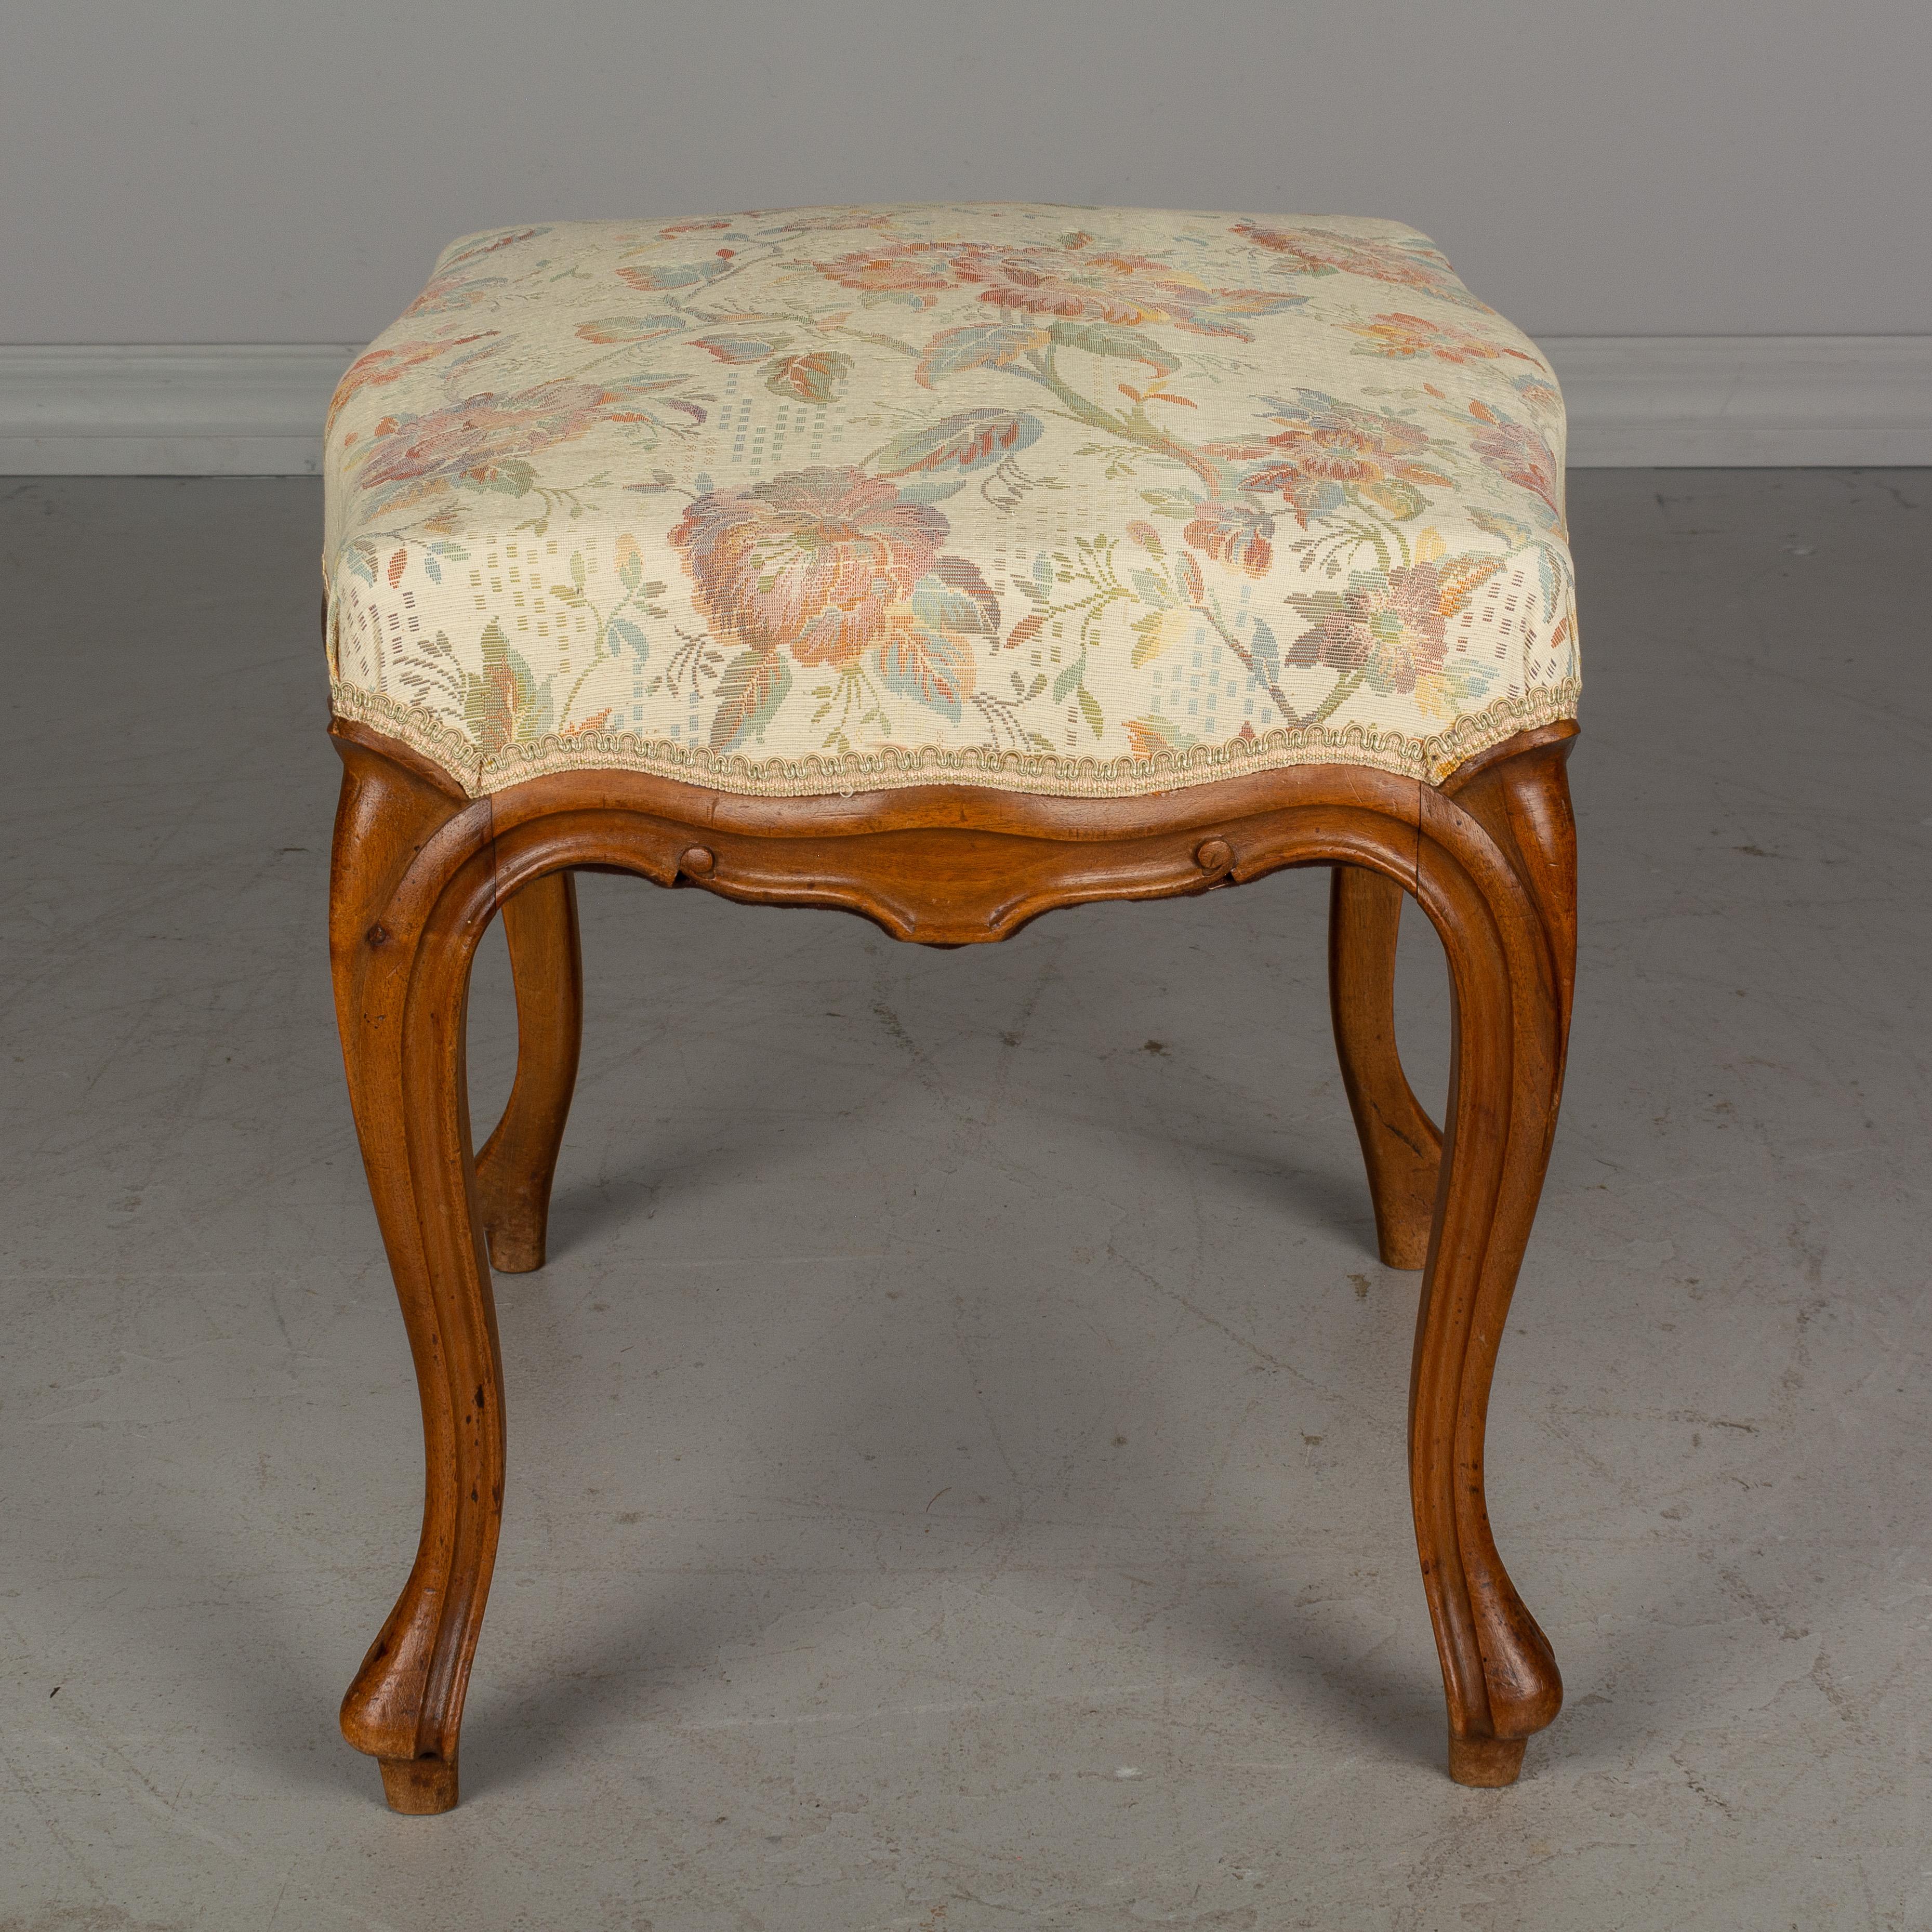 20th Century French Louis XV Style Foot Stool or Bench